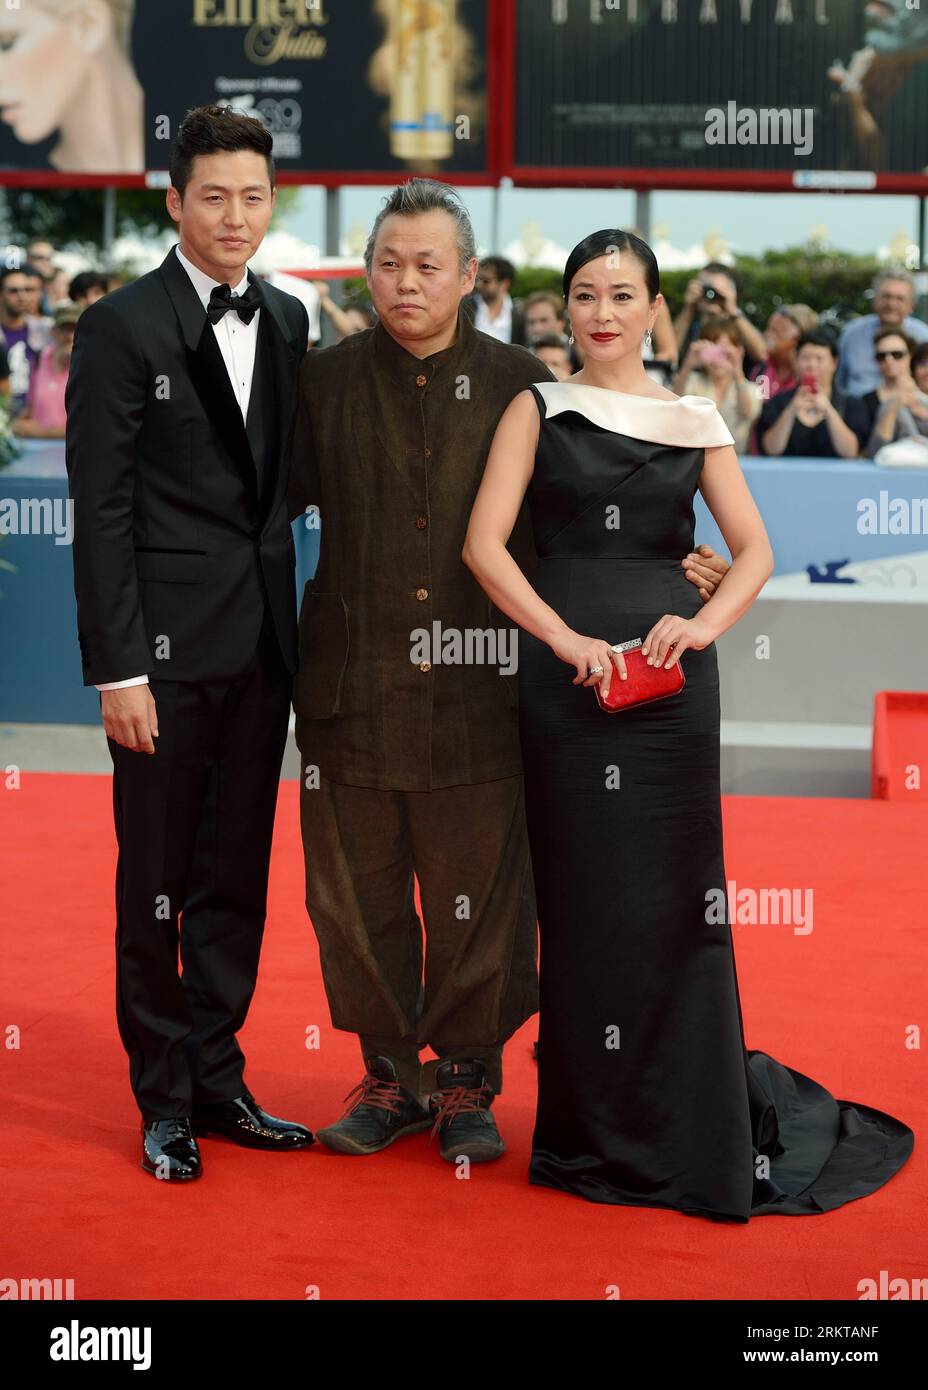 Bildnummer: 58427873  Datum: 04.09.2012  Copyright: imago/Xinhua (120904) -- VENICE, Sept. 4, 2012 (Xinhua) -- South Korean director Kim Ki-duk (C), together with cast members Cho Min-soo (R) and Lee Jung-jin, pose at the red carpet for the premiere of the film Pieta at the 69th Venice International Film Festival in Venice, Italy, Sept. 4, 2012. (Xinhua/Wang Qingqin) (jl) ITALY-VENICE-FILM FESTIVAL- PIETA -PREMIERE PUBLICATIONxNOTxINxCHN People Film Festival 69. Internationales Filmfestival in Venedig x0x xdd premiumd 2012 hoch      58427873 Date 04 09 2012 Copyright Imago XINHUA  Venice Sept Stock Photo